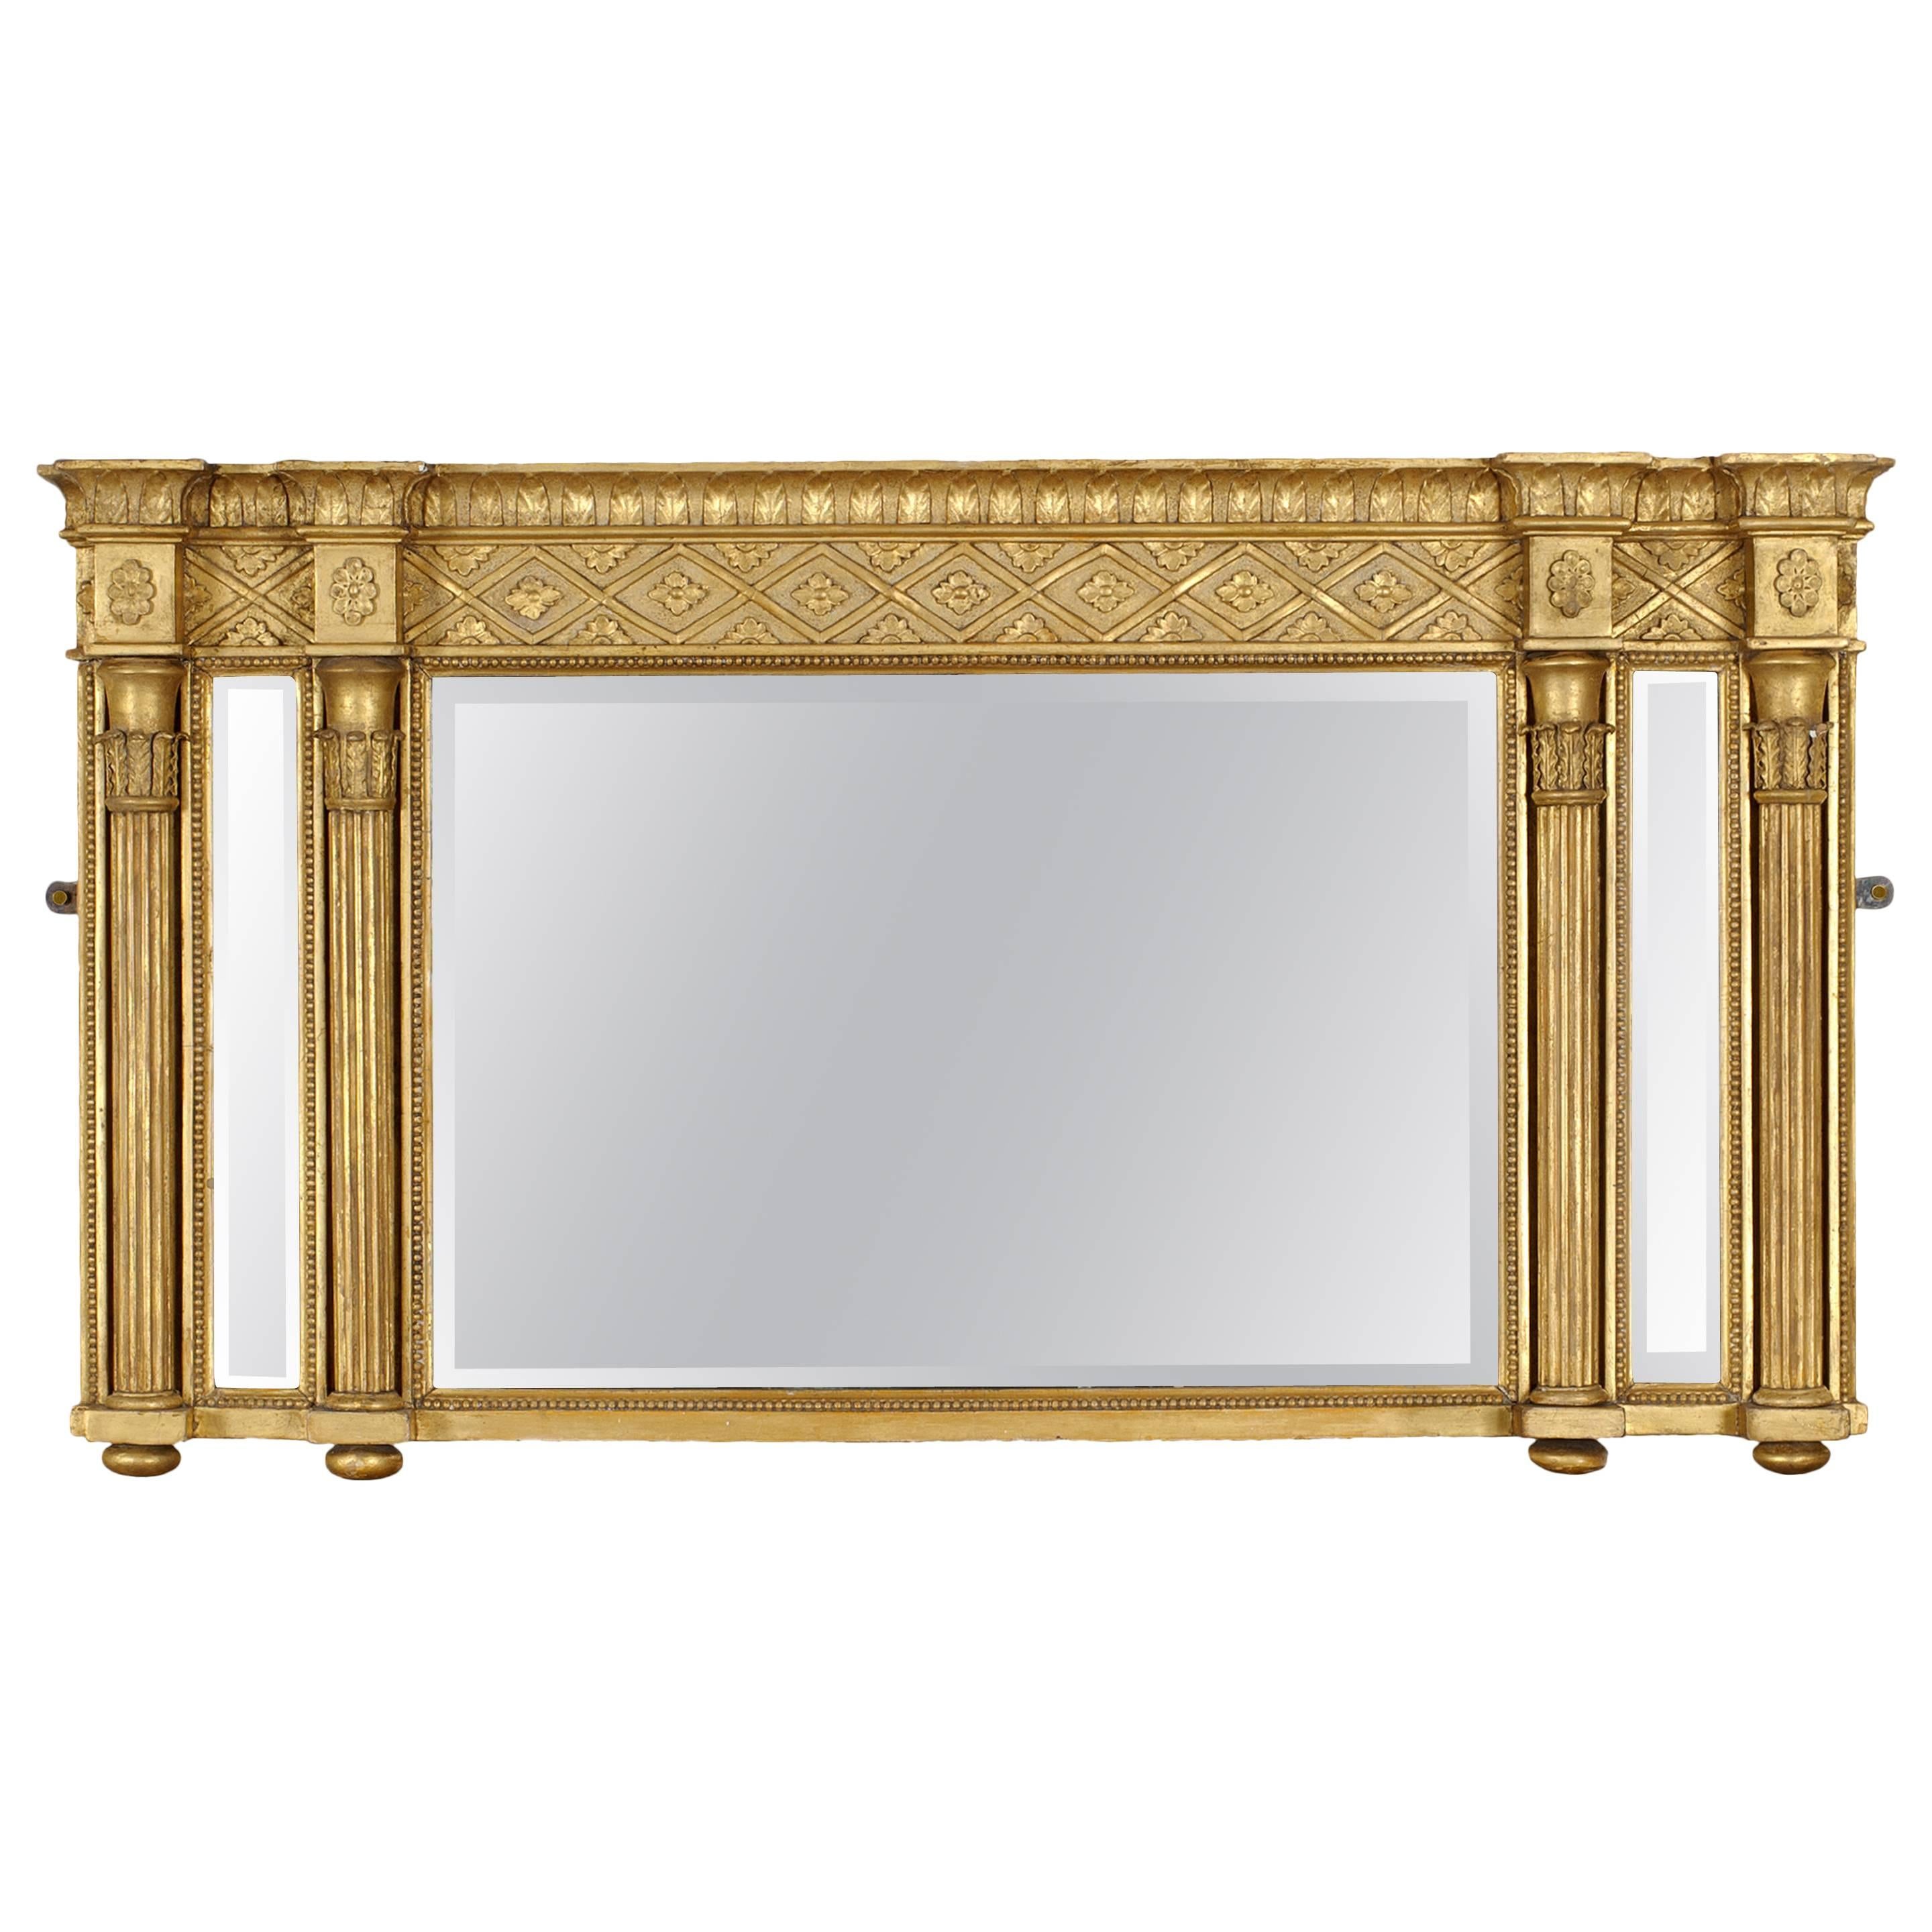 Regency Carved Giltwood Triptych Overmantel Mirror For Sale